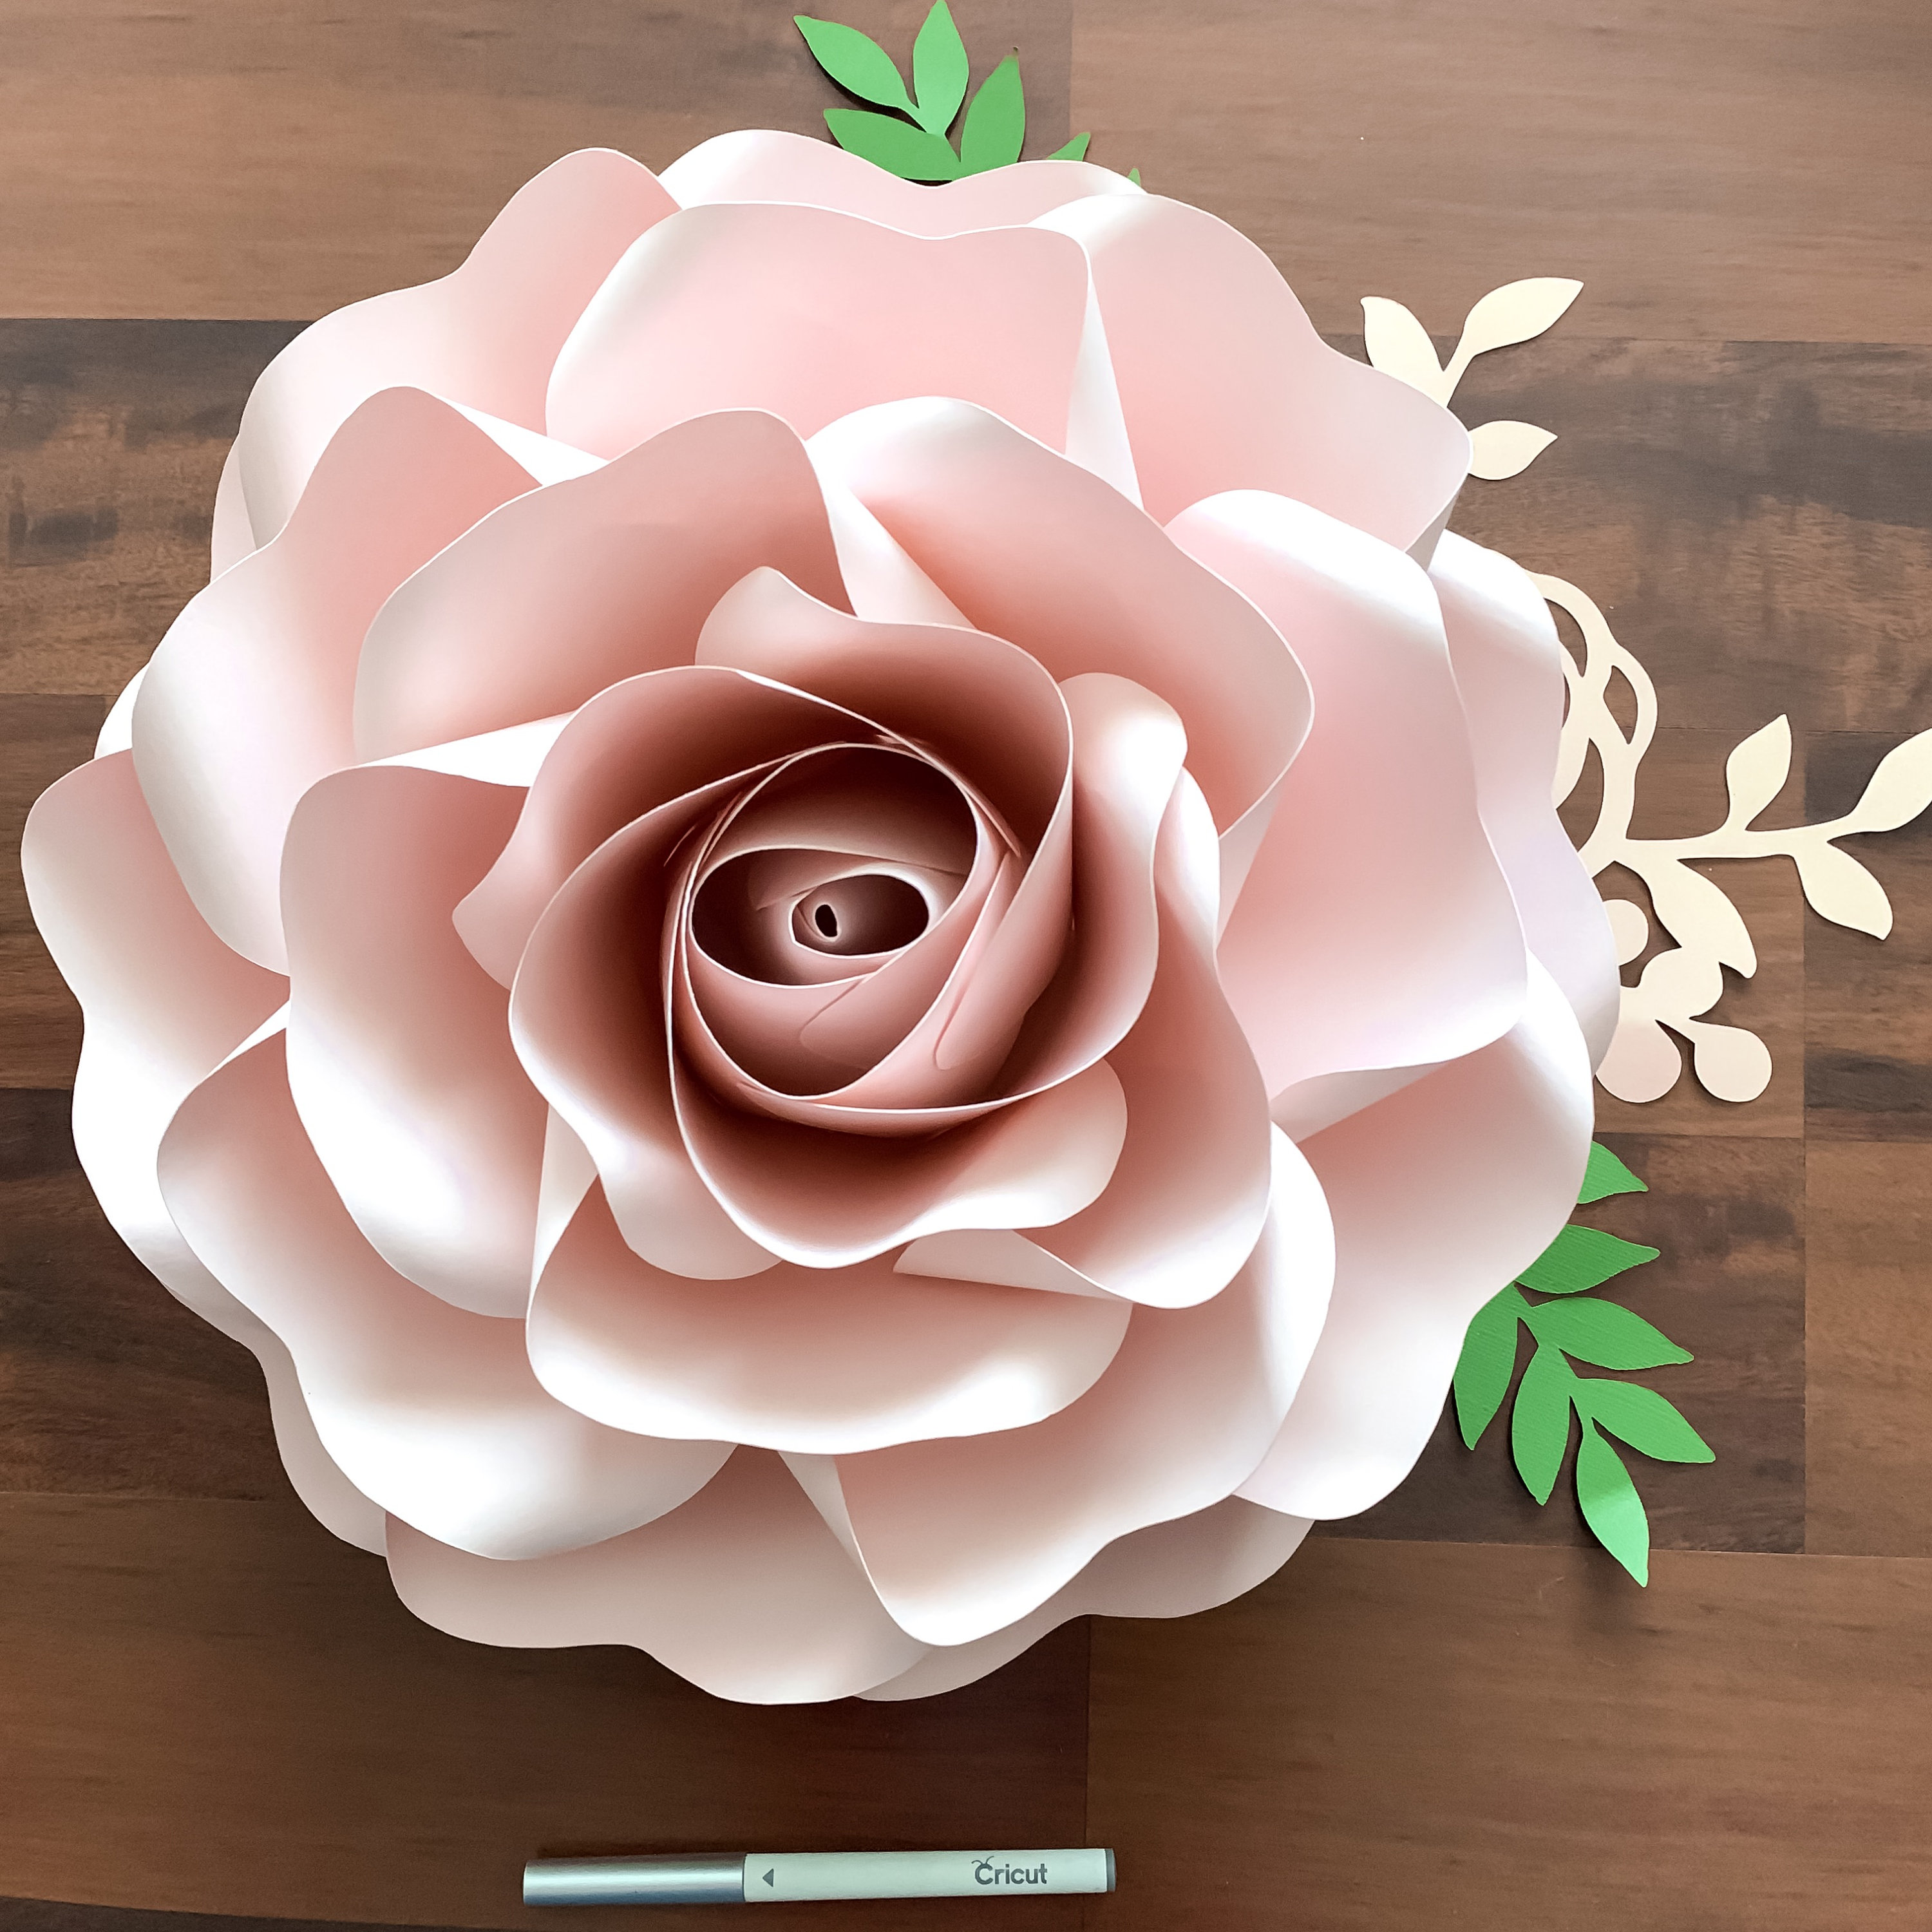 Extra Large PDF Full Size Rose 6 Template 30 34 Inches Rose When Made 